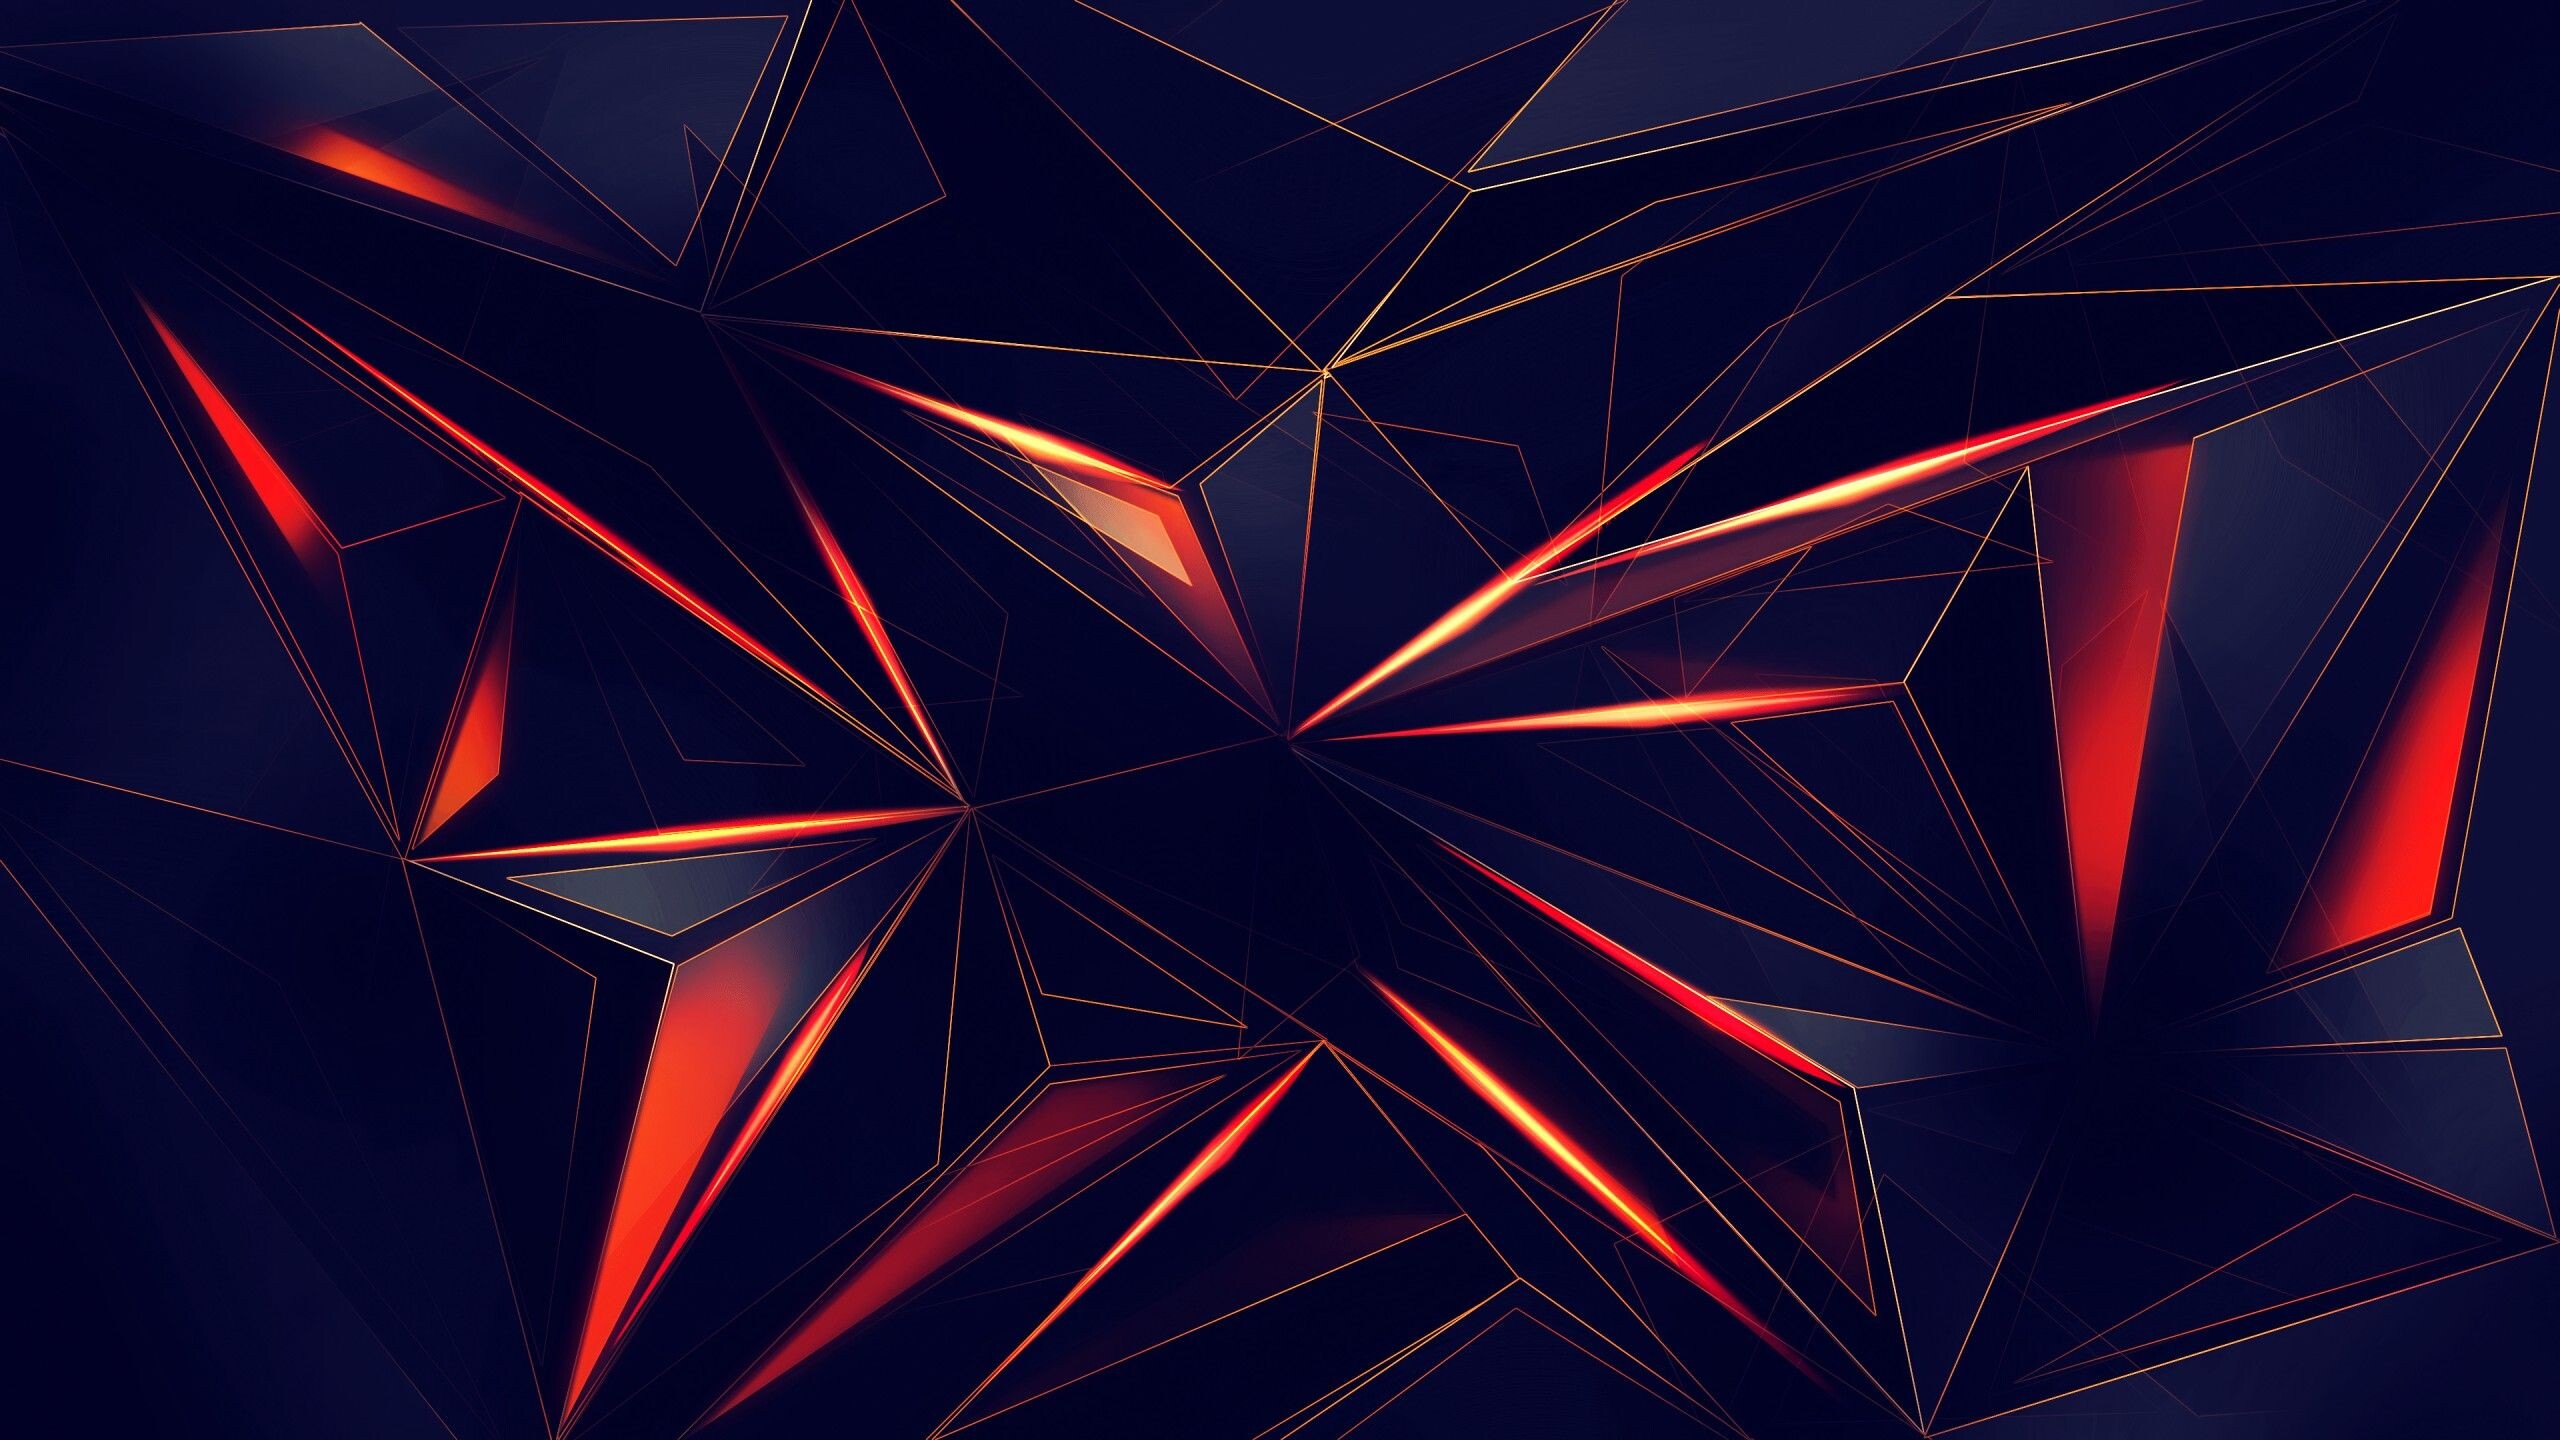 Geometric Abstract: Triangles, Gradient, Supplementary angles. 2560x1440 HD Wallpaper.